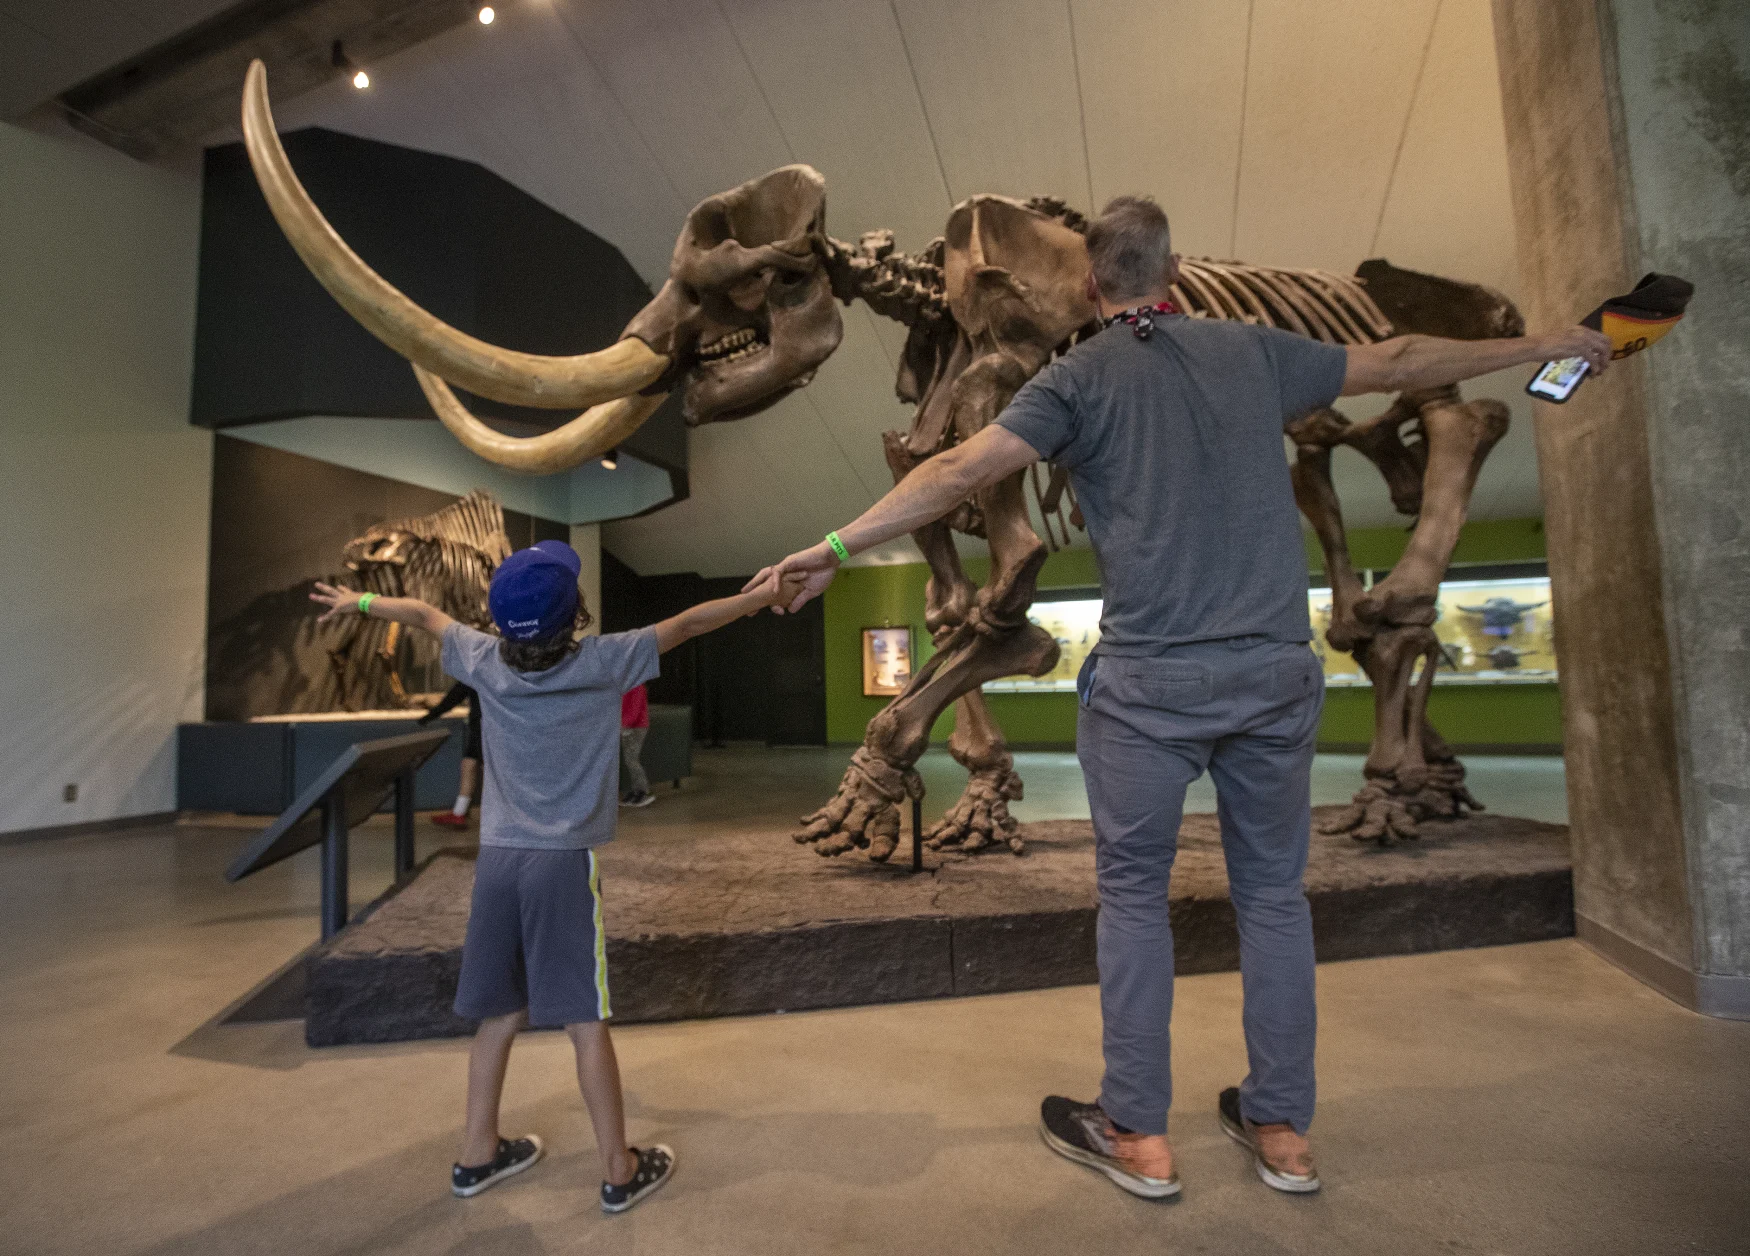 LOS ANGELES, CA - APRIL 08, 2021: Connor Matlen, 6, and his father Logan, 45, of Hawthorne, spread their arms to try and cover the length of the American mastodon on display at The La Brea Tar Pits in Los Angeles that re-opened to the public after being closed for over a year due to the COVID-19 outbreak.  The American mastodon existed from 2 million to 10,000 years ago.  (Mel Melcon/Los Angeles Times via Getty Images)